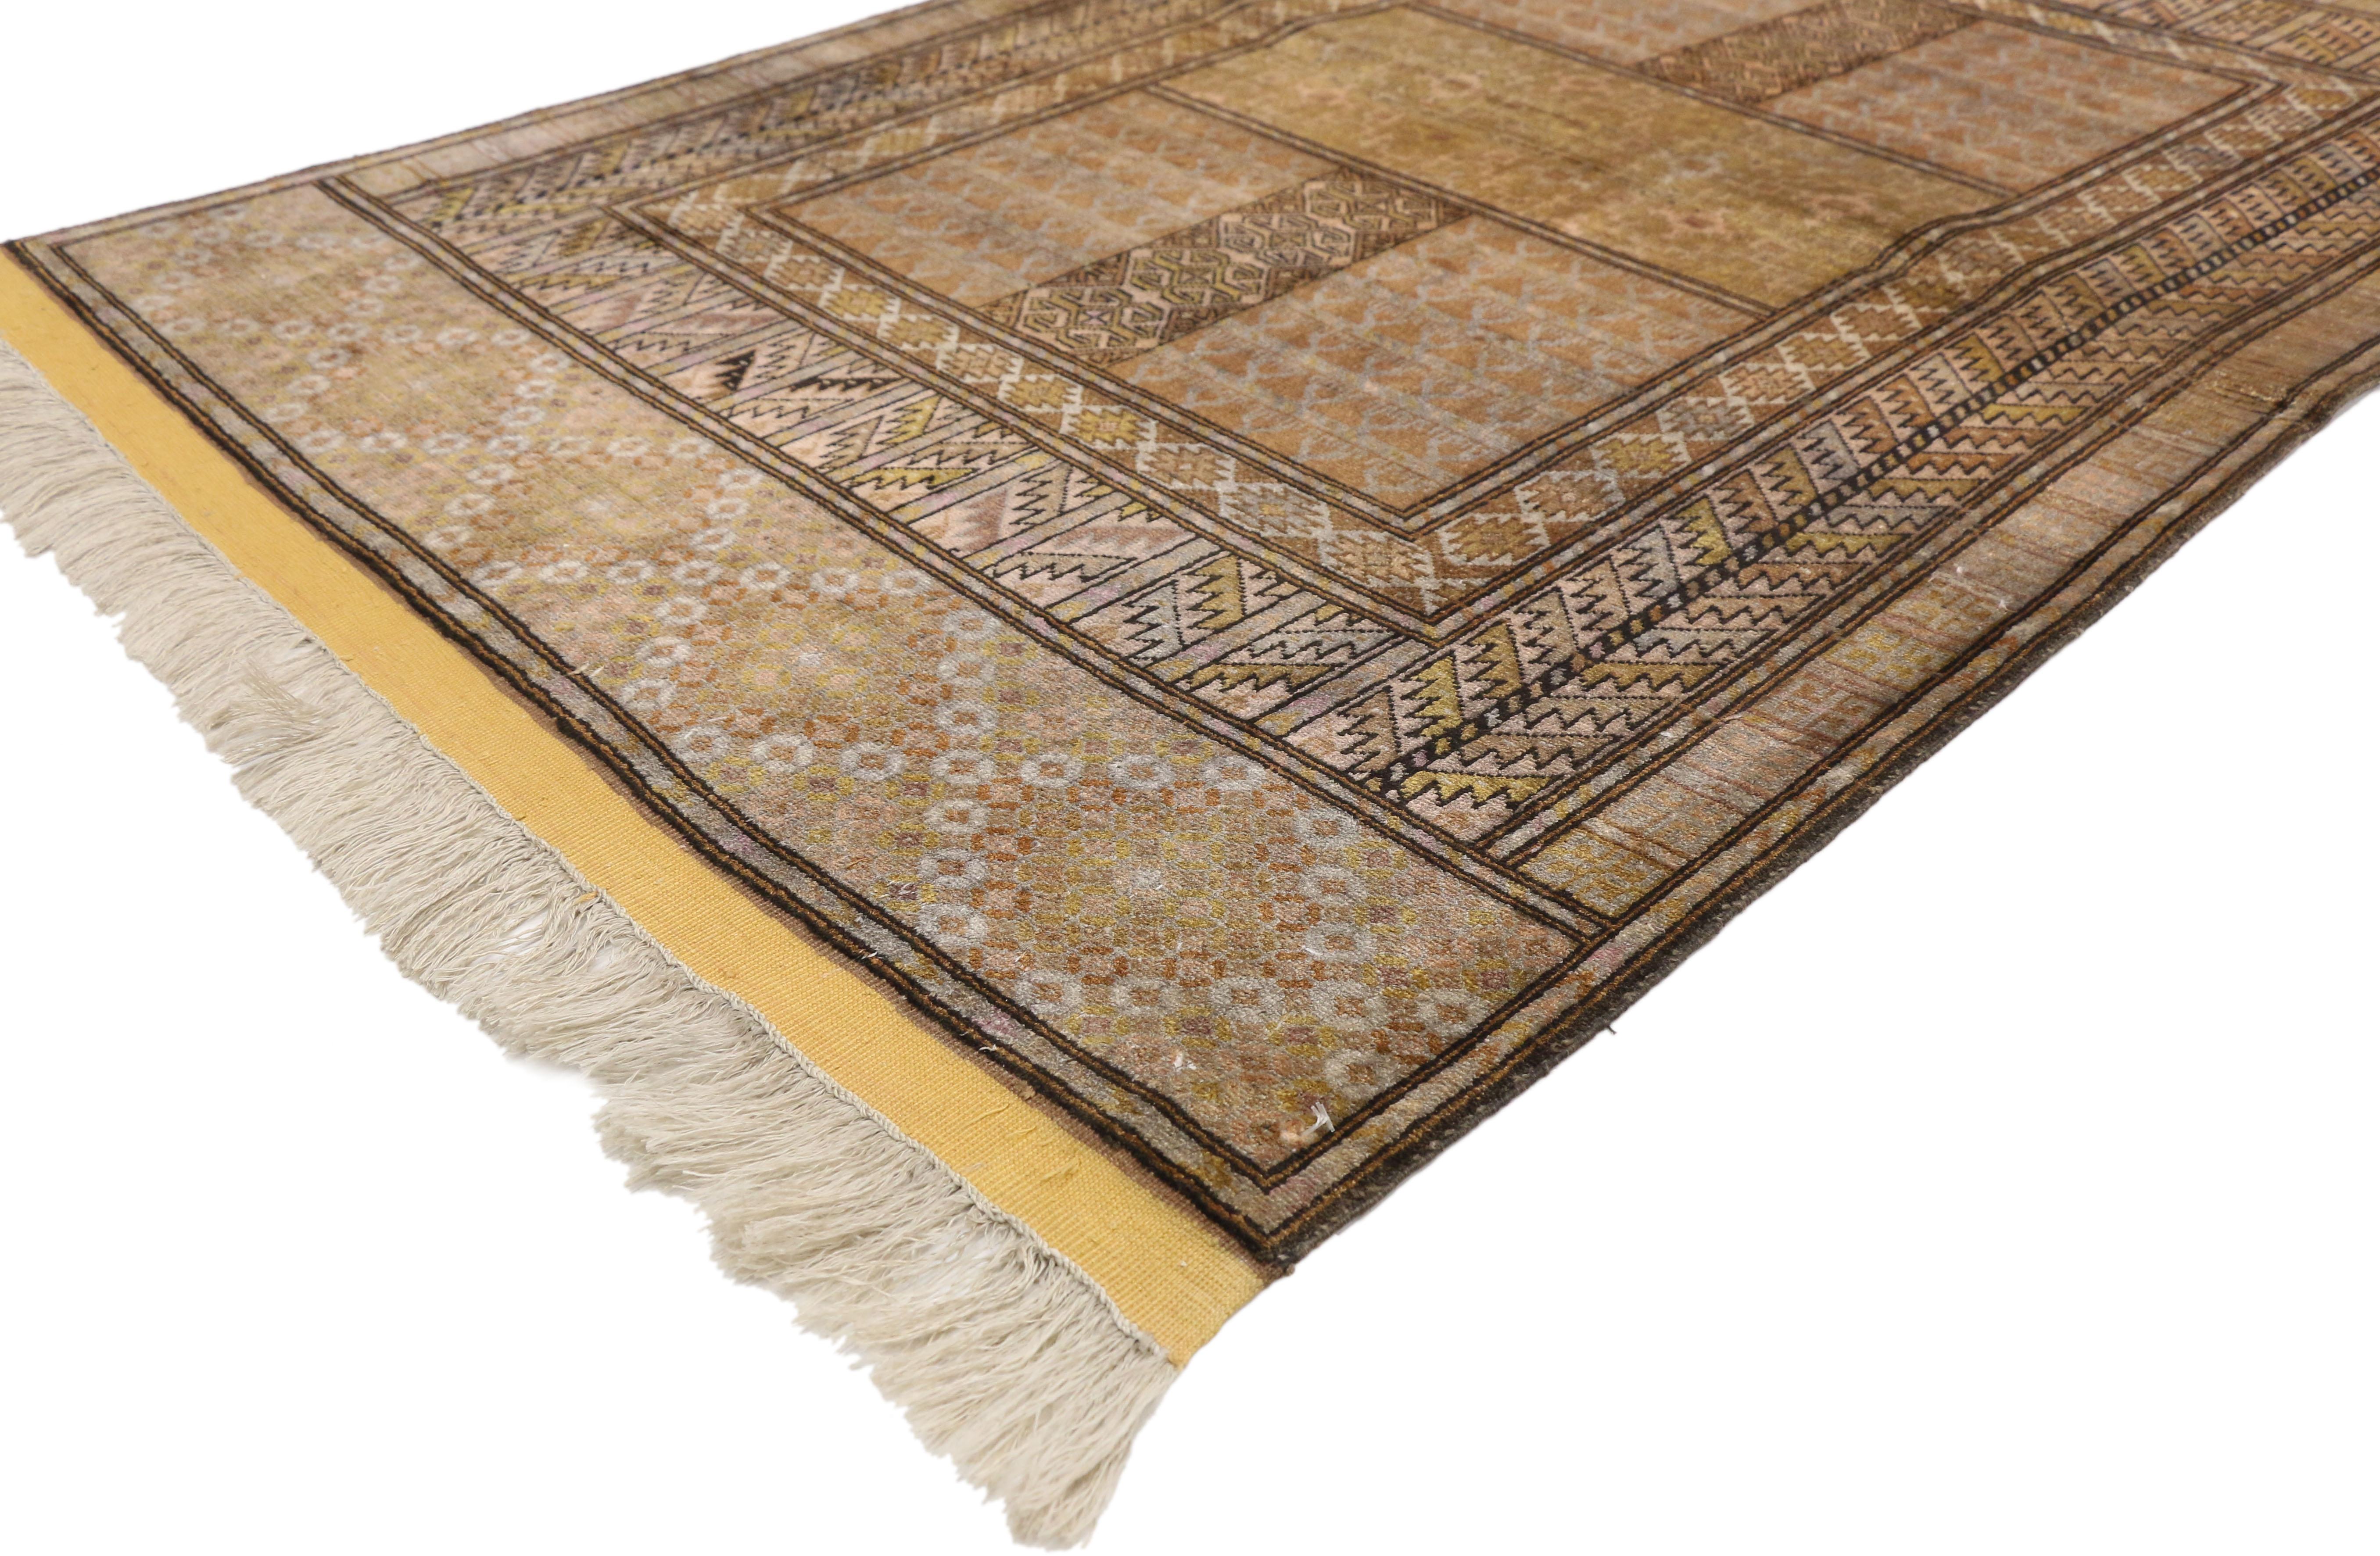 71971 vintage Afghan Turkoman Tribal Ersari Engsi, Hatchli tent door Hanging Ensi, wool rug. This hand knotted wool vintage Afghan Hatchli Ersari rug is also known as a Turkoman tent door Hanging aka Ensi. It features a compartmental design composed